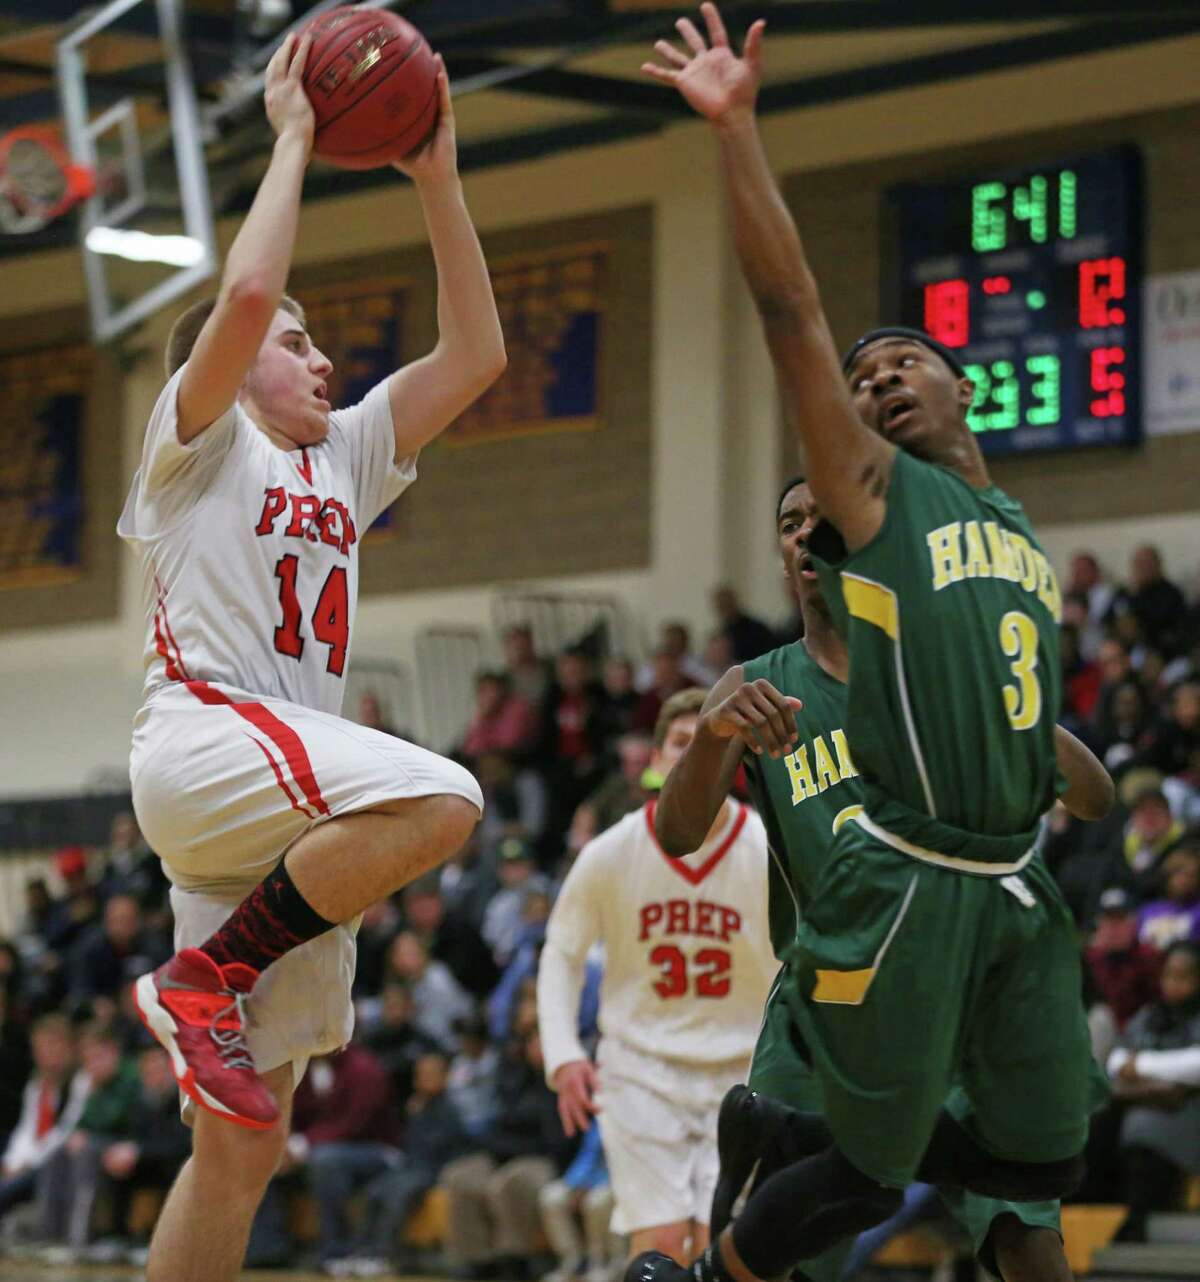 Fairfield Prep's #14 Richard Kelly shoots to the basket during Monday evening SCC semifinals against Hamden High School. Fairfield Prep would win 68-51.